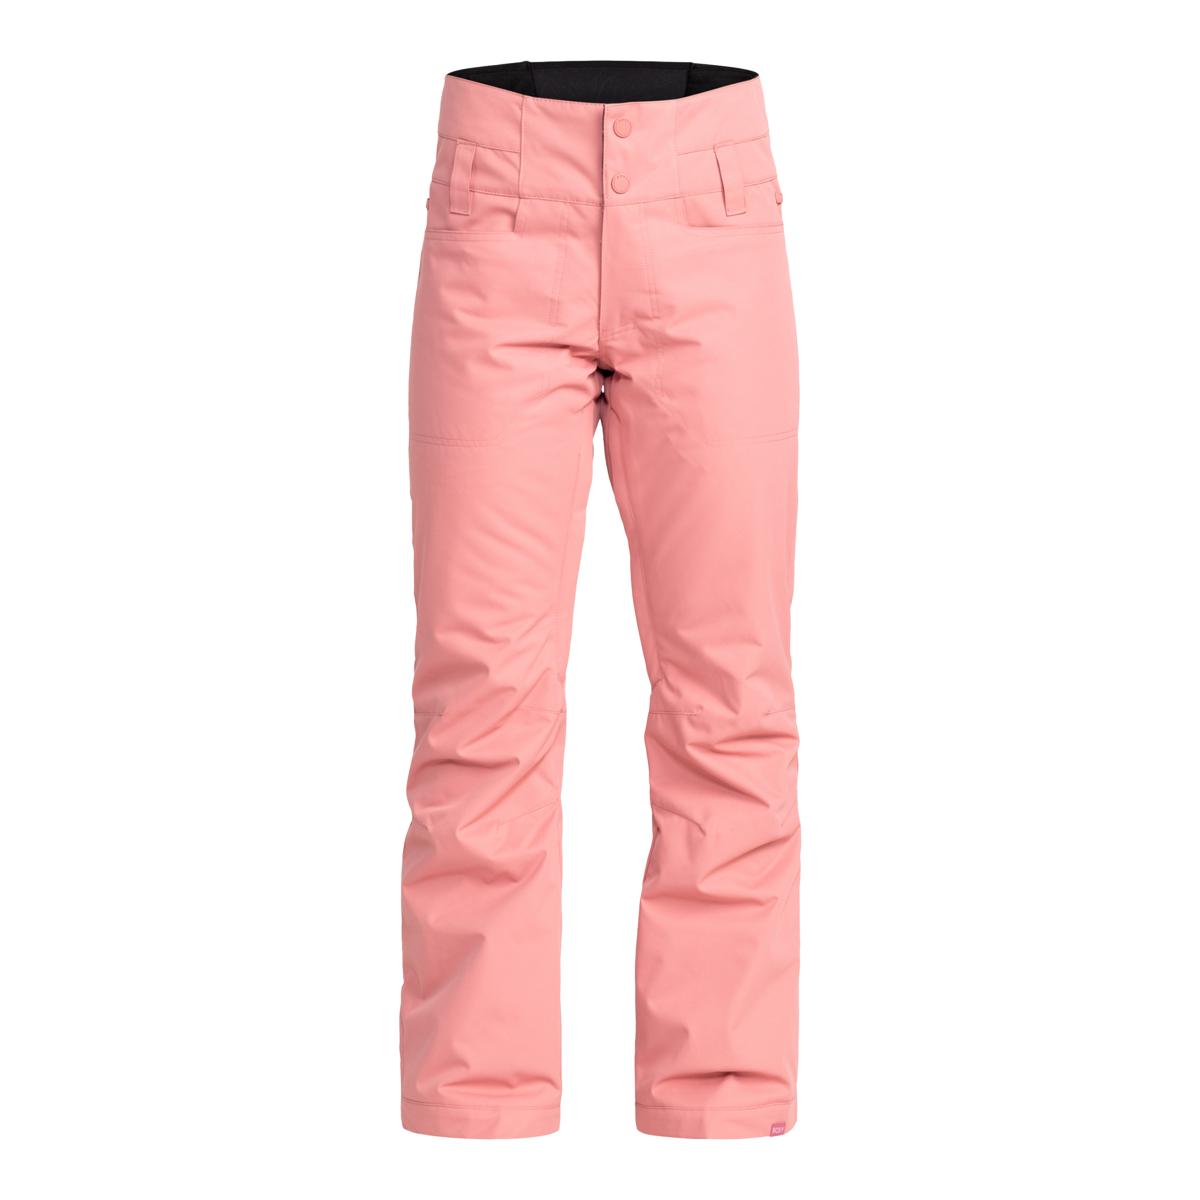 Roxy Diversion Pant Girl's- Dusty Rose